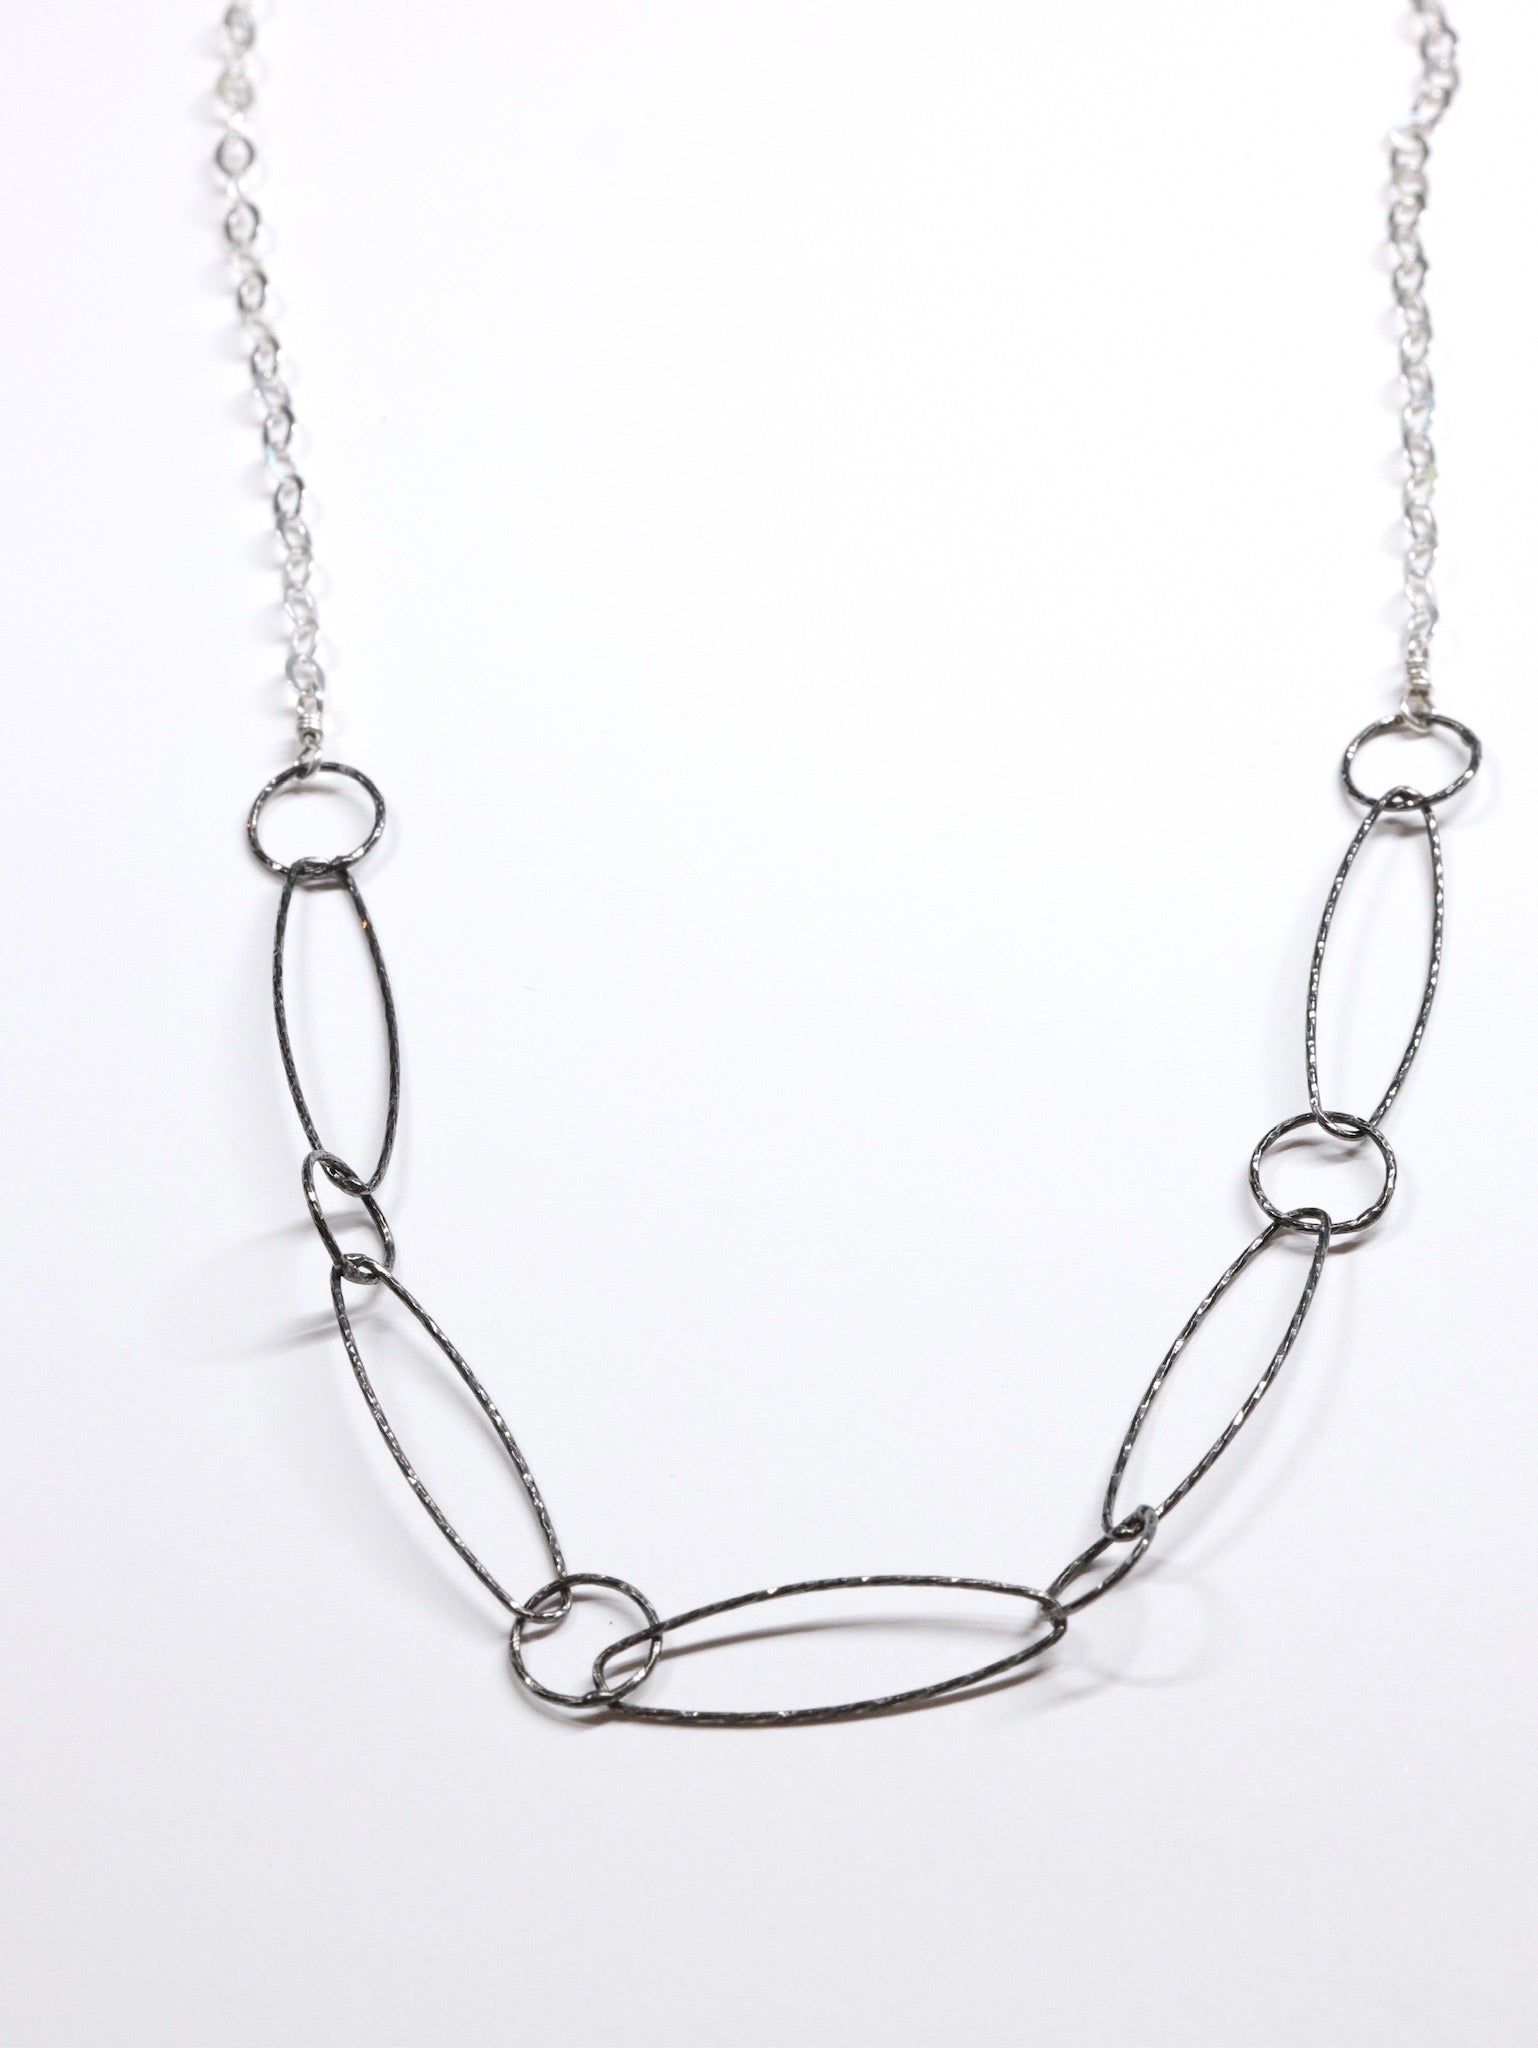 5 Links Necklace - Black and Silver